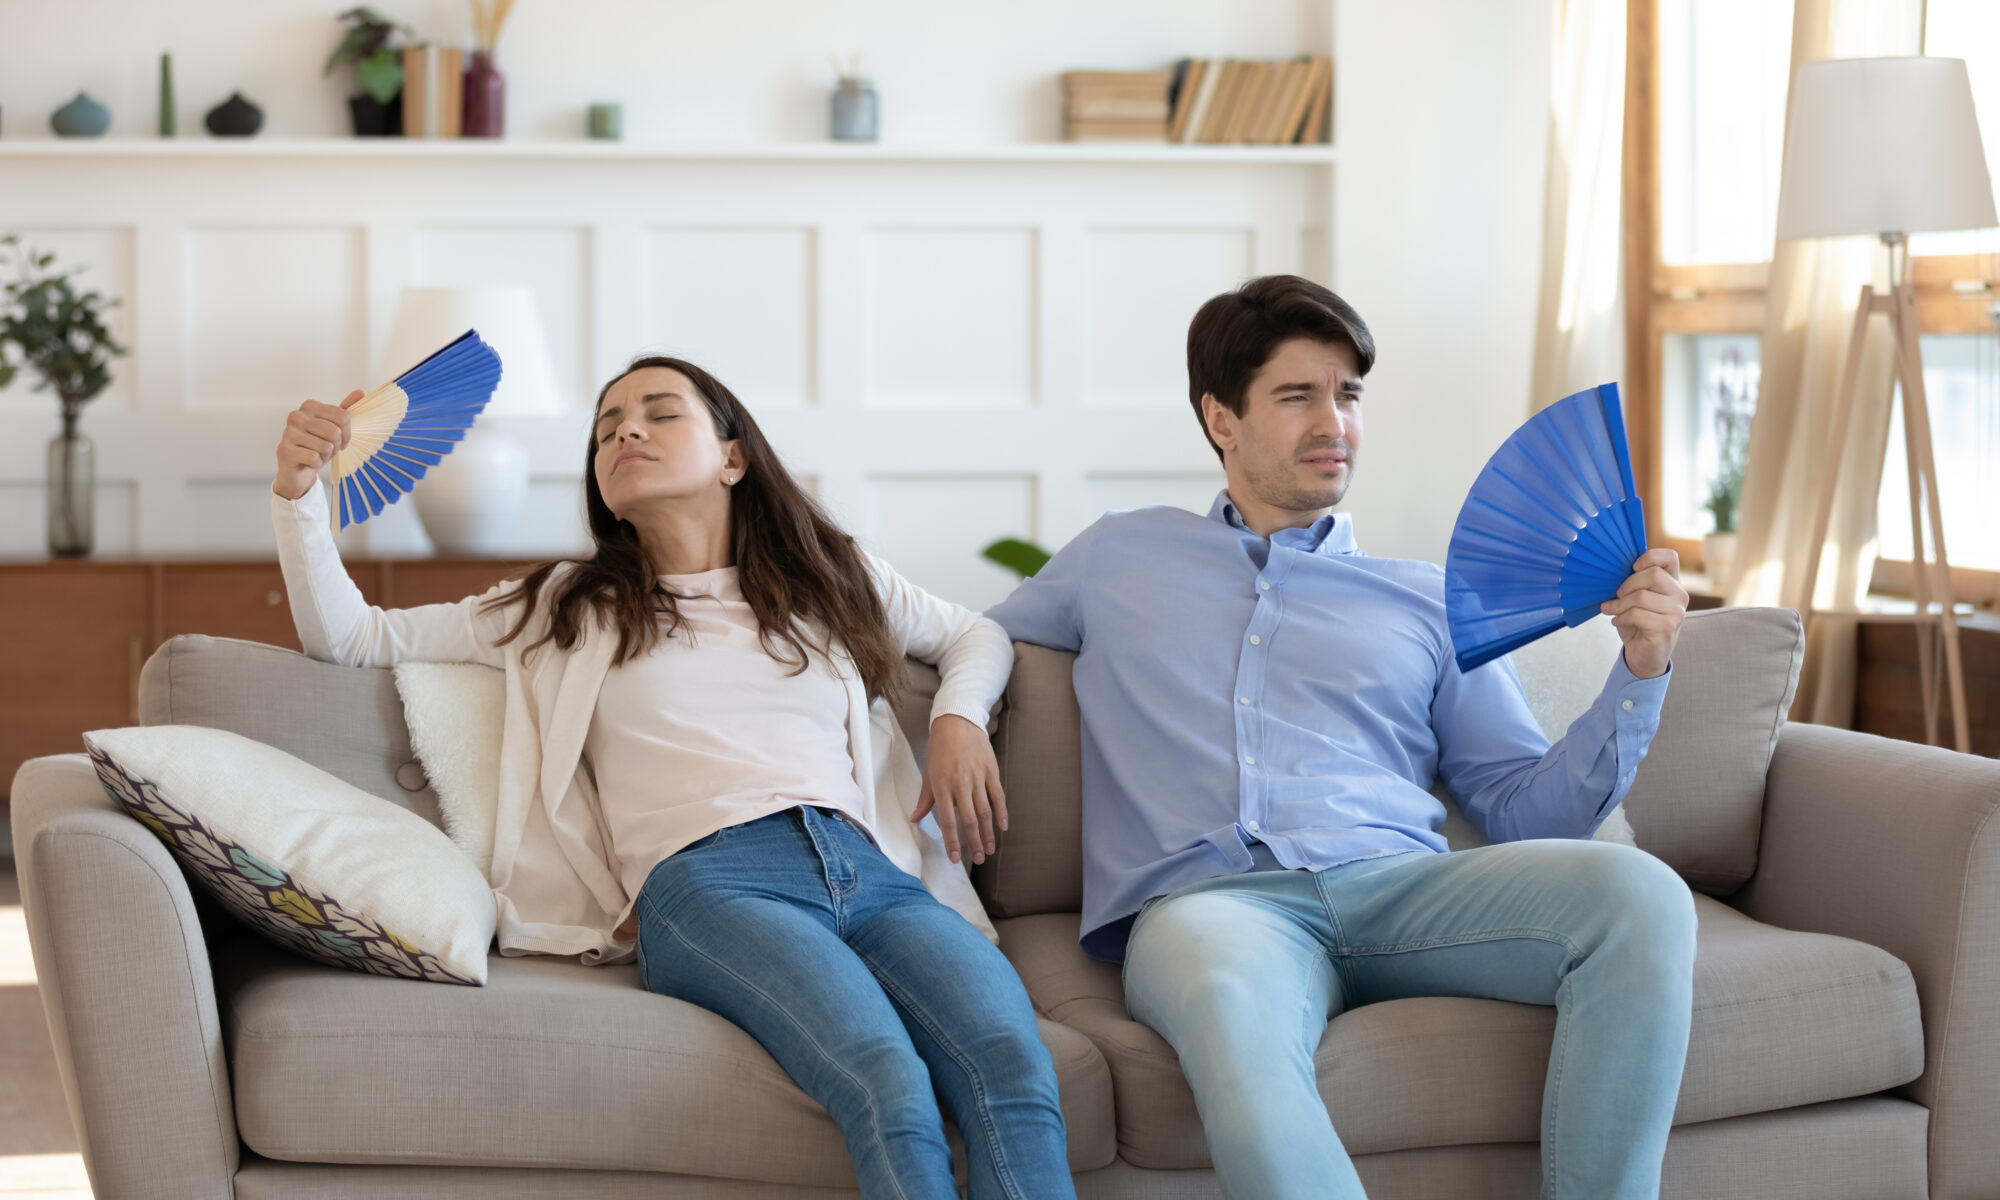 Stressed,Tired,Young,Family,Couple,Sitting,Together,On,Sofa,,Fanning